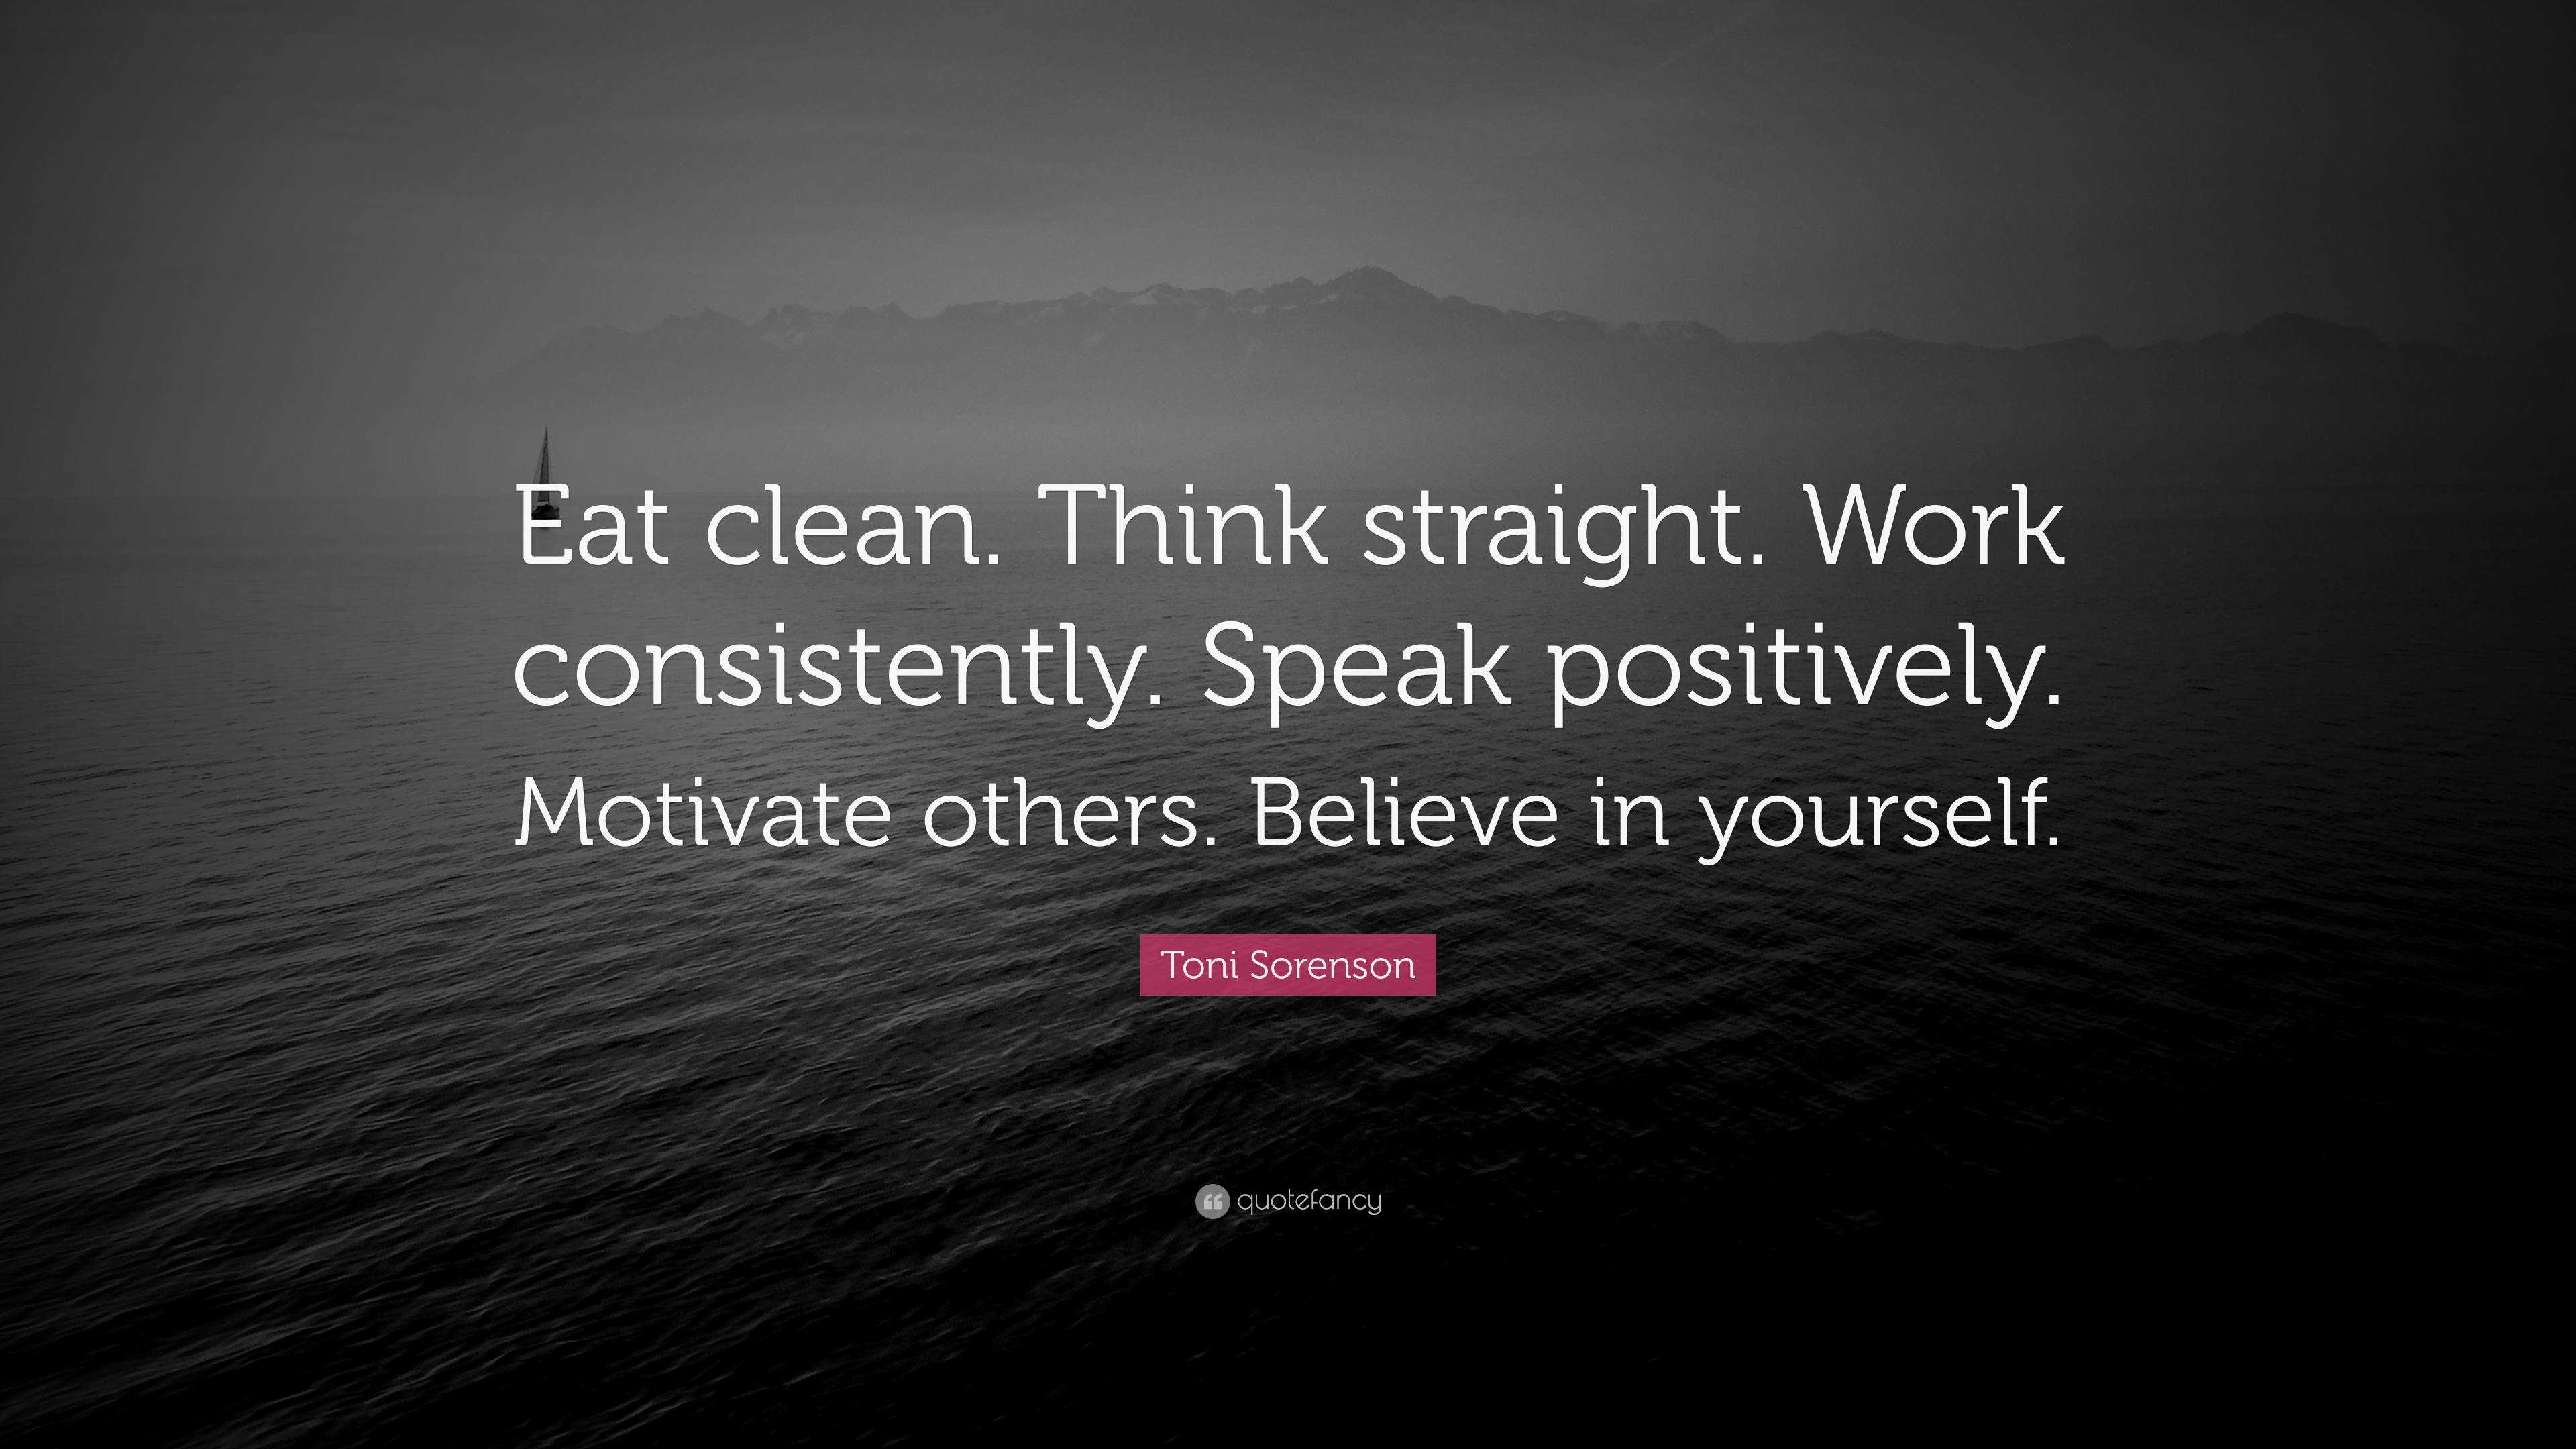 Toni Sorenson Quote: “Eat clean. Think straight. Work consistently. Speak  positively. Motivate others. Believe in yourself.”